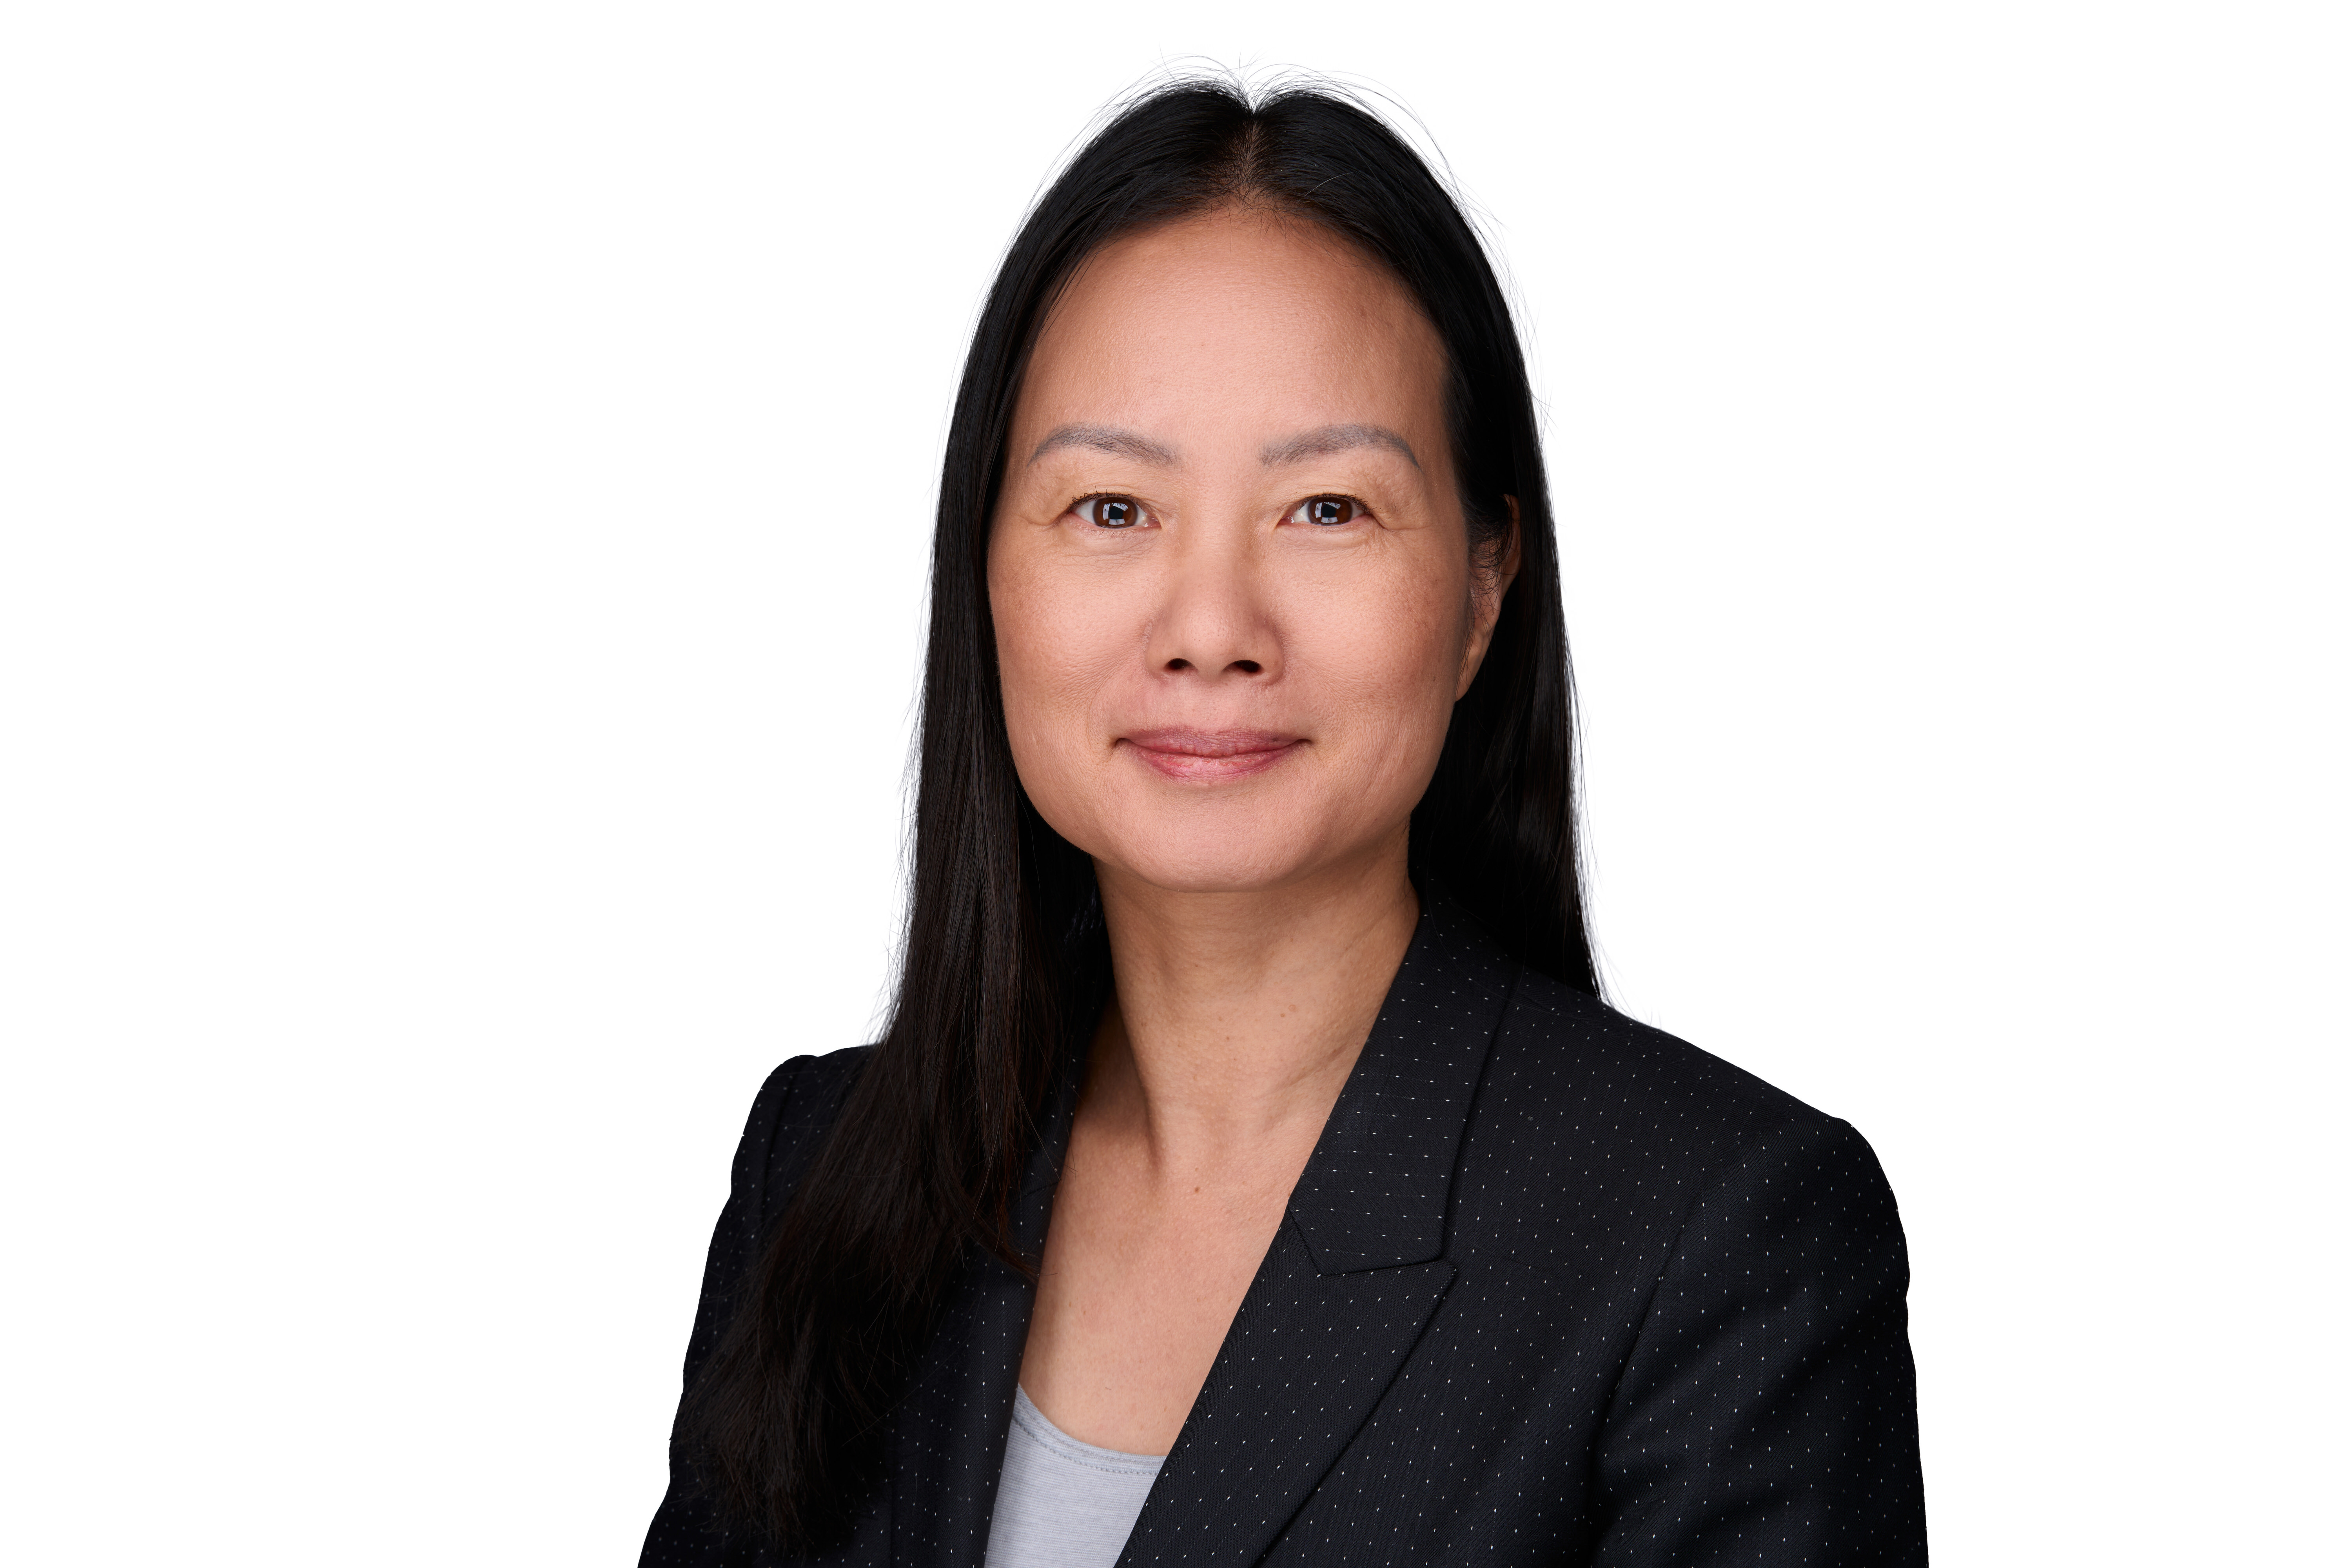 Photo of Julie Ngo, Chief Operating Officer at Calculus Capital, London